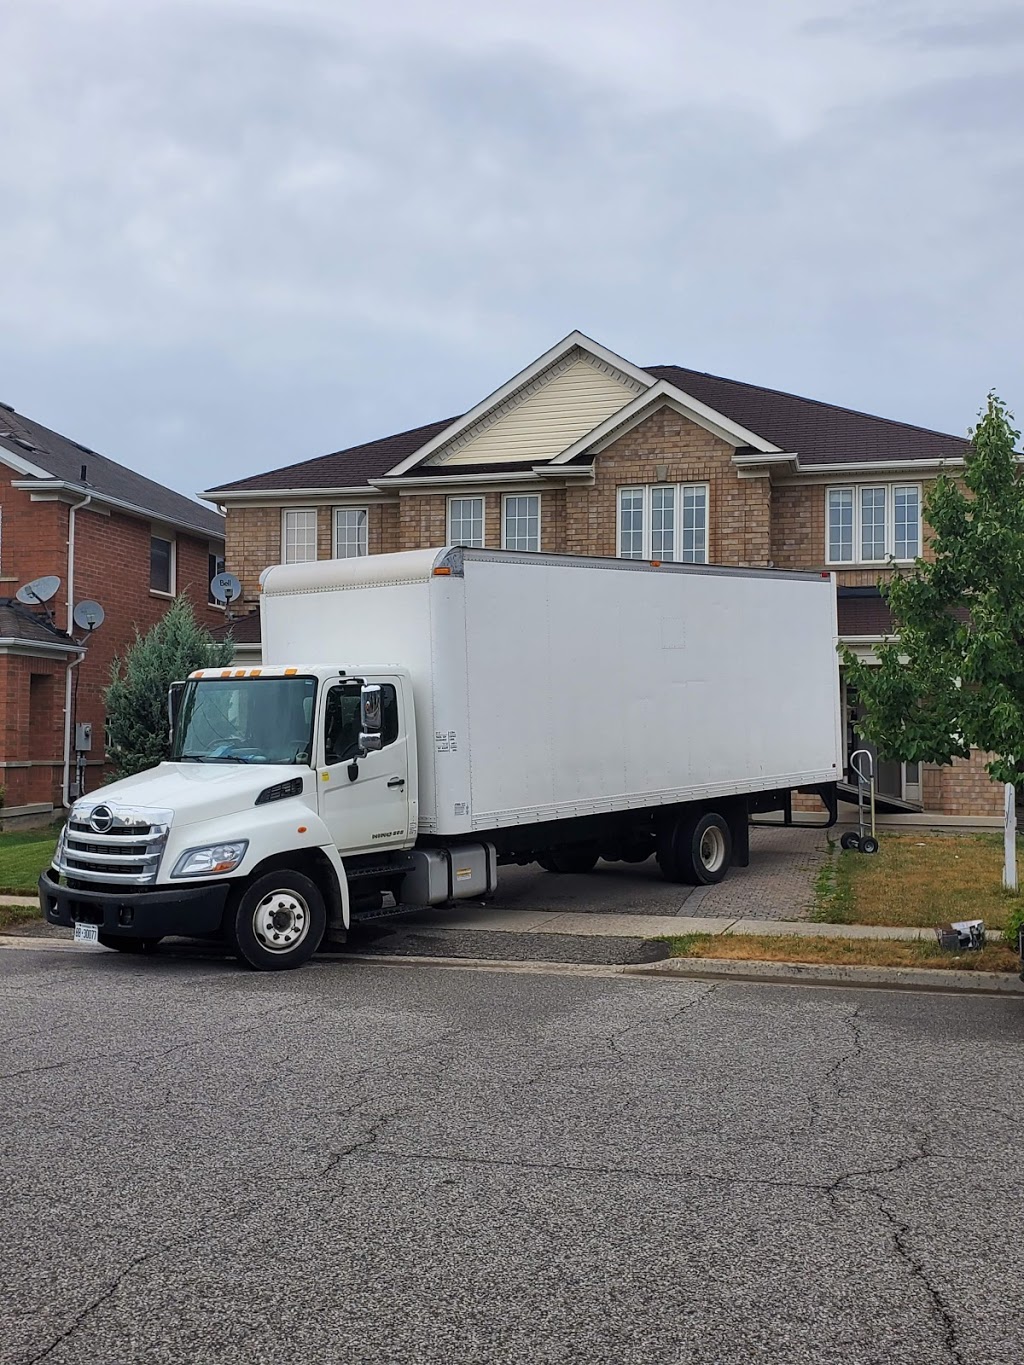 Home On Truck | 2020 Don Mills Rd, Toronto, ON M3A 3R6, Canada | Phone: (647) 619-2929